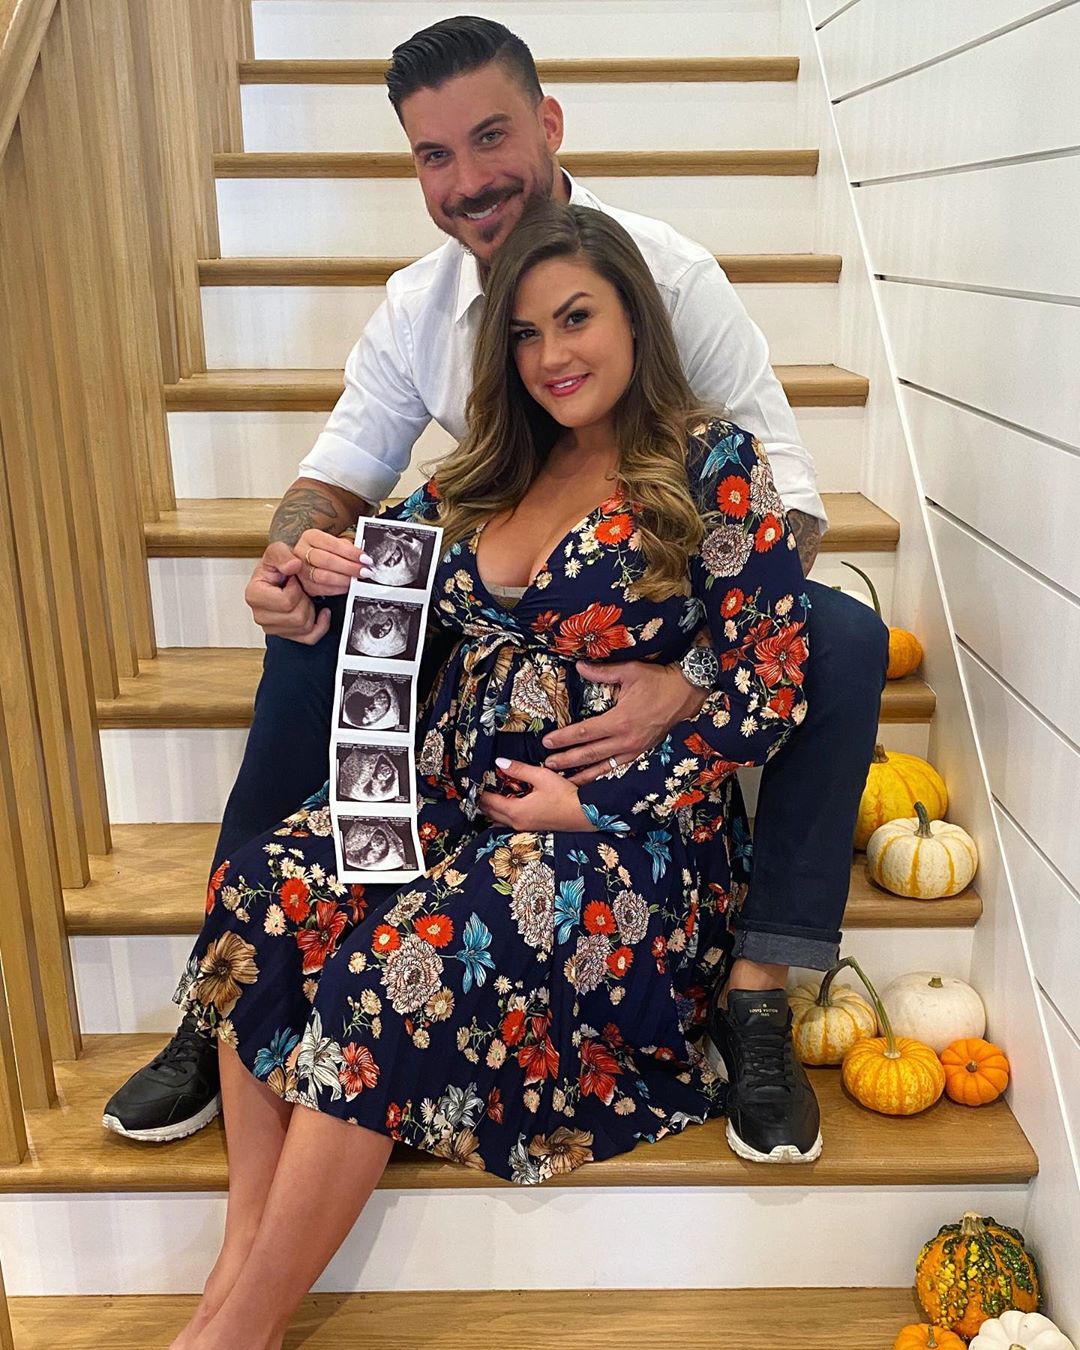 Vanderpump Rules' Brittany Cartwright Pregnant, Expecting 1st Child With Jax Taylor